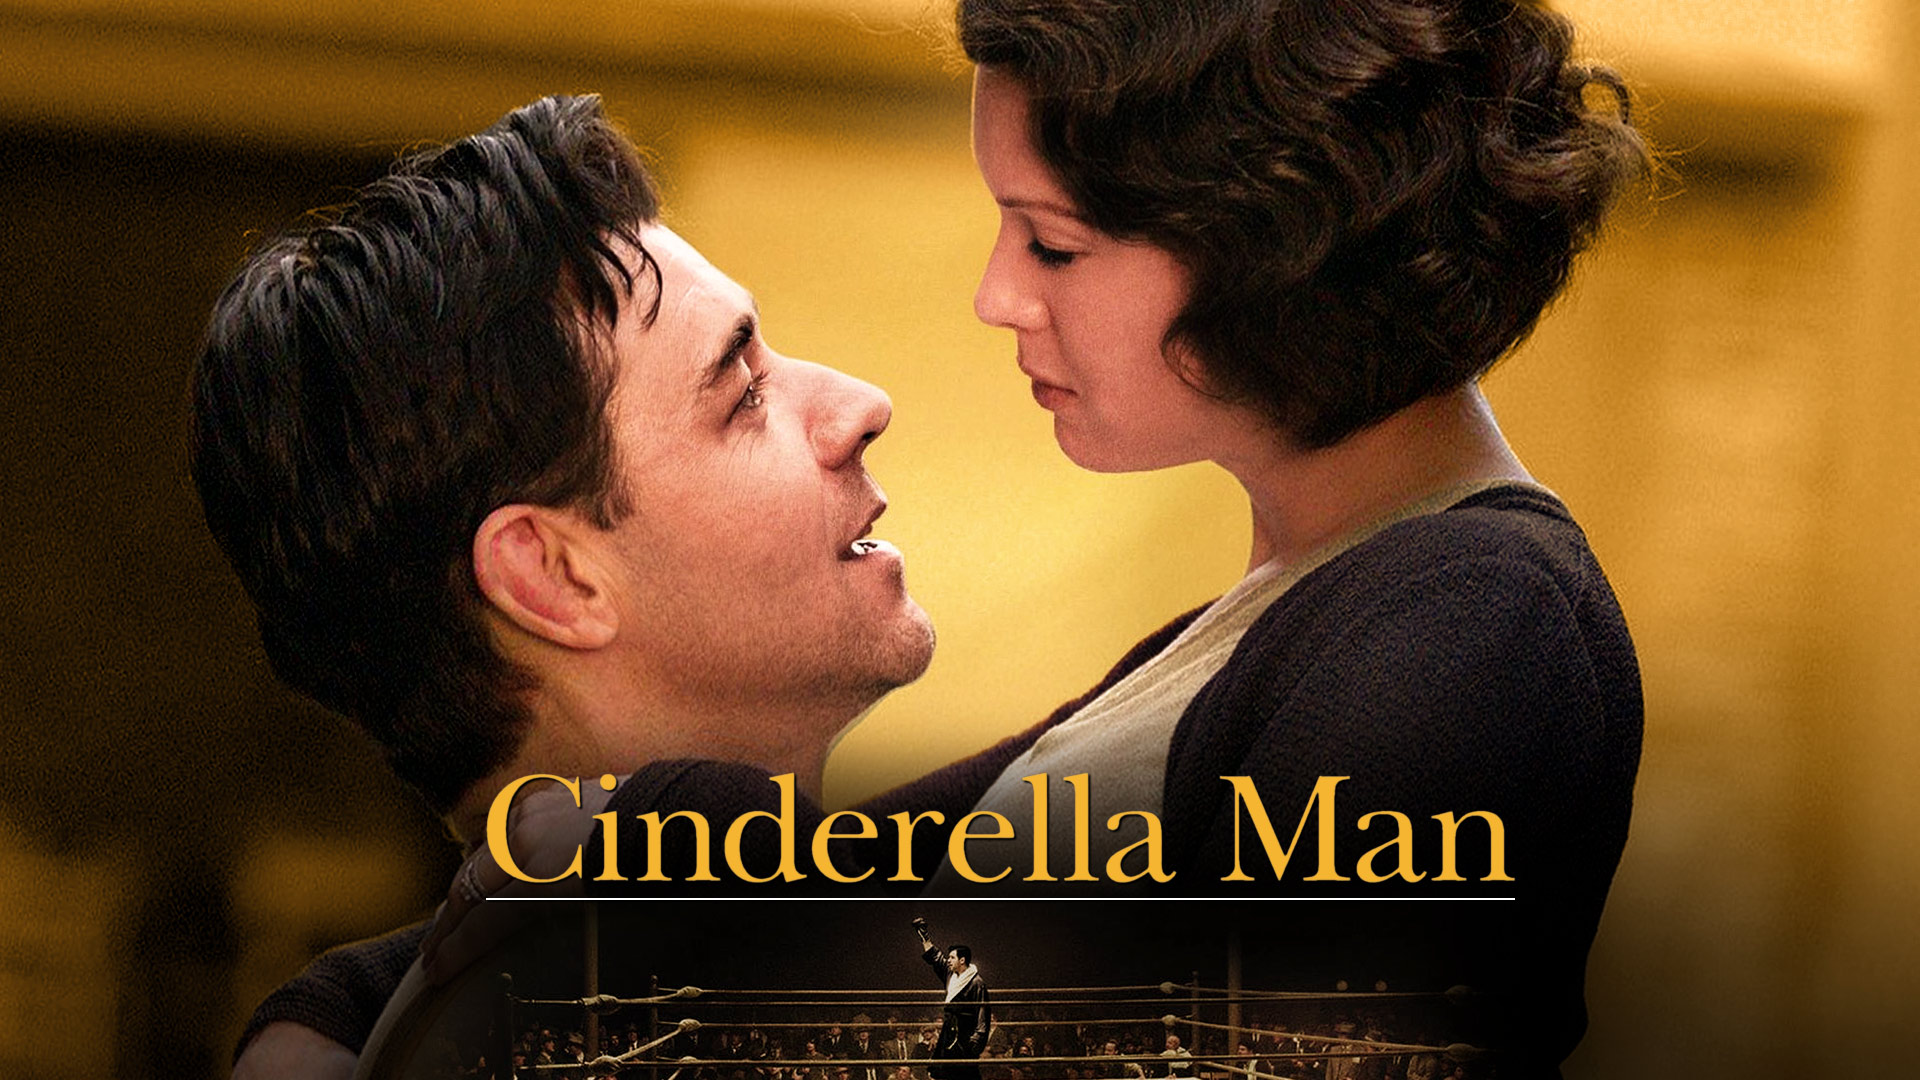 33-facts-about-the-movie-cinderella-man